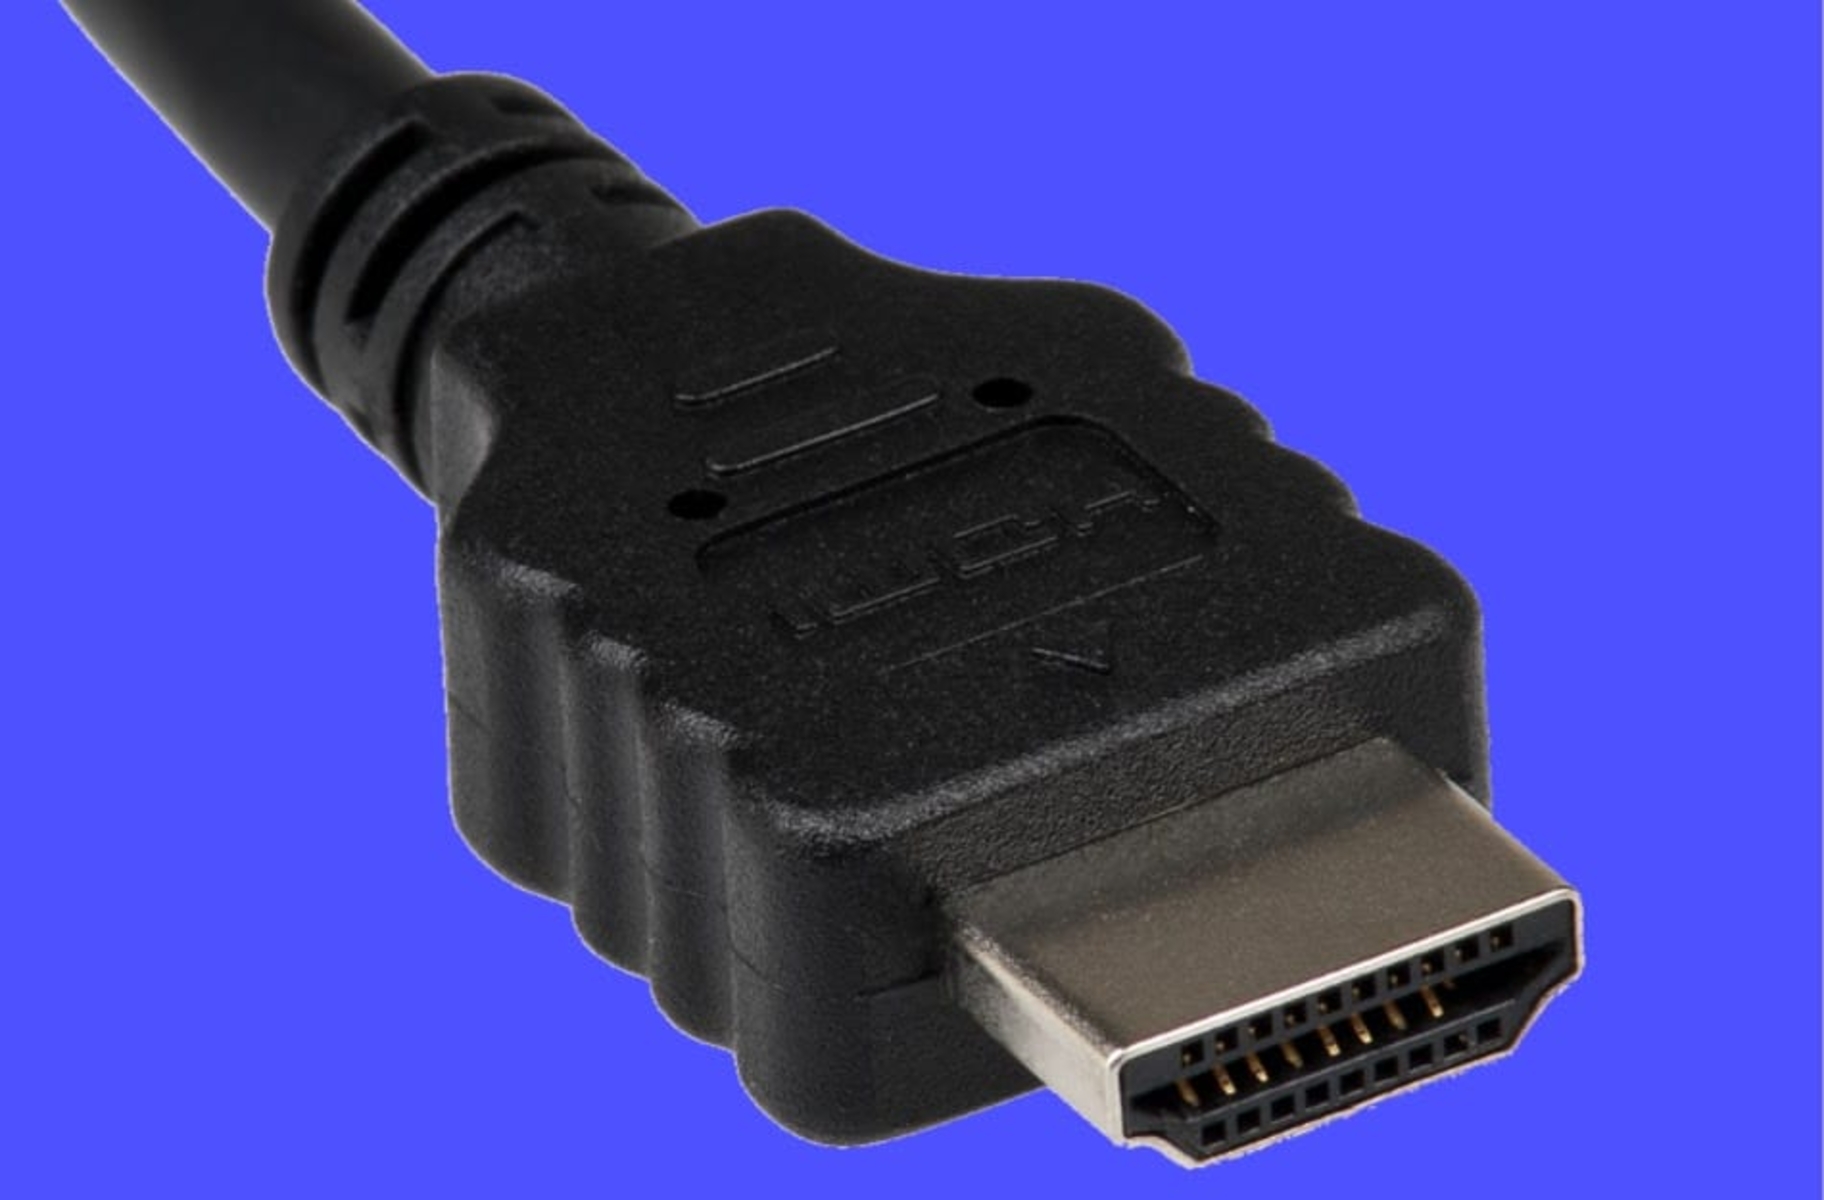 Does It Matter Which HDMI Cable I Use